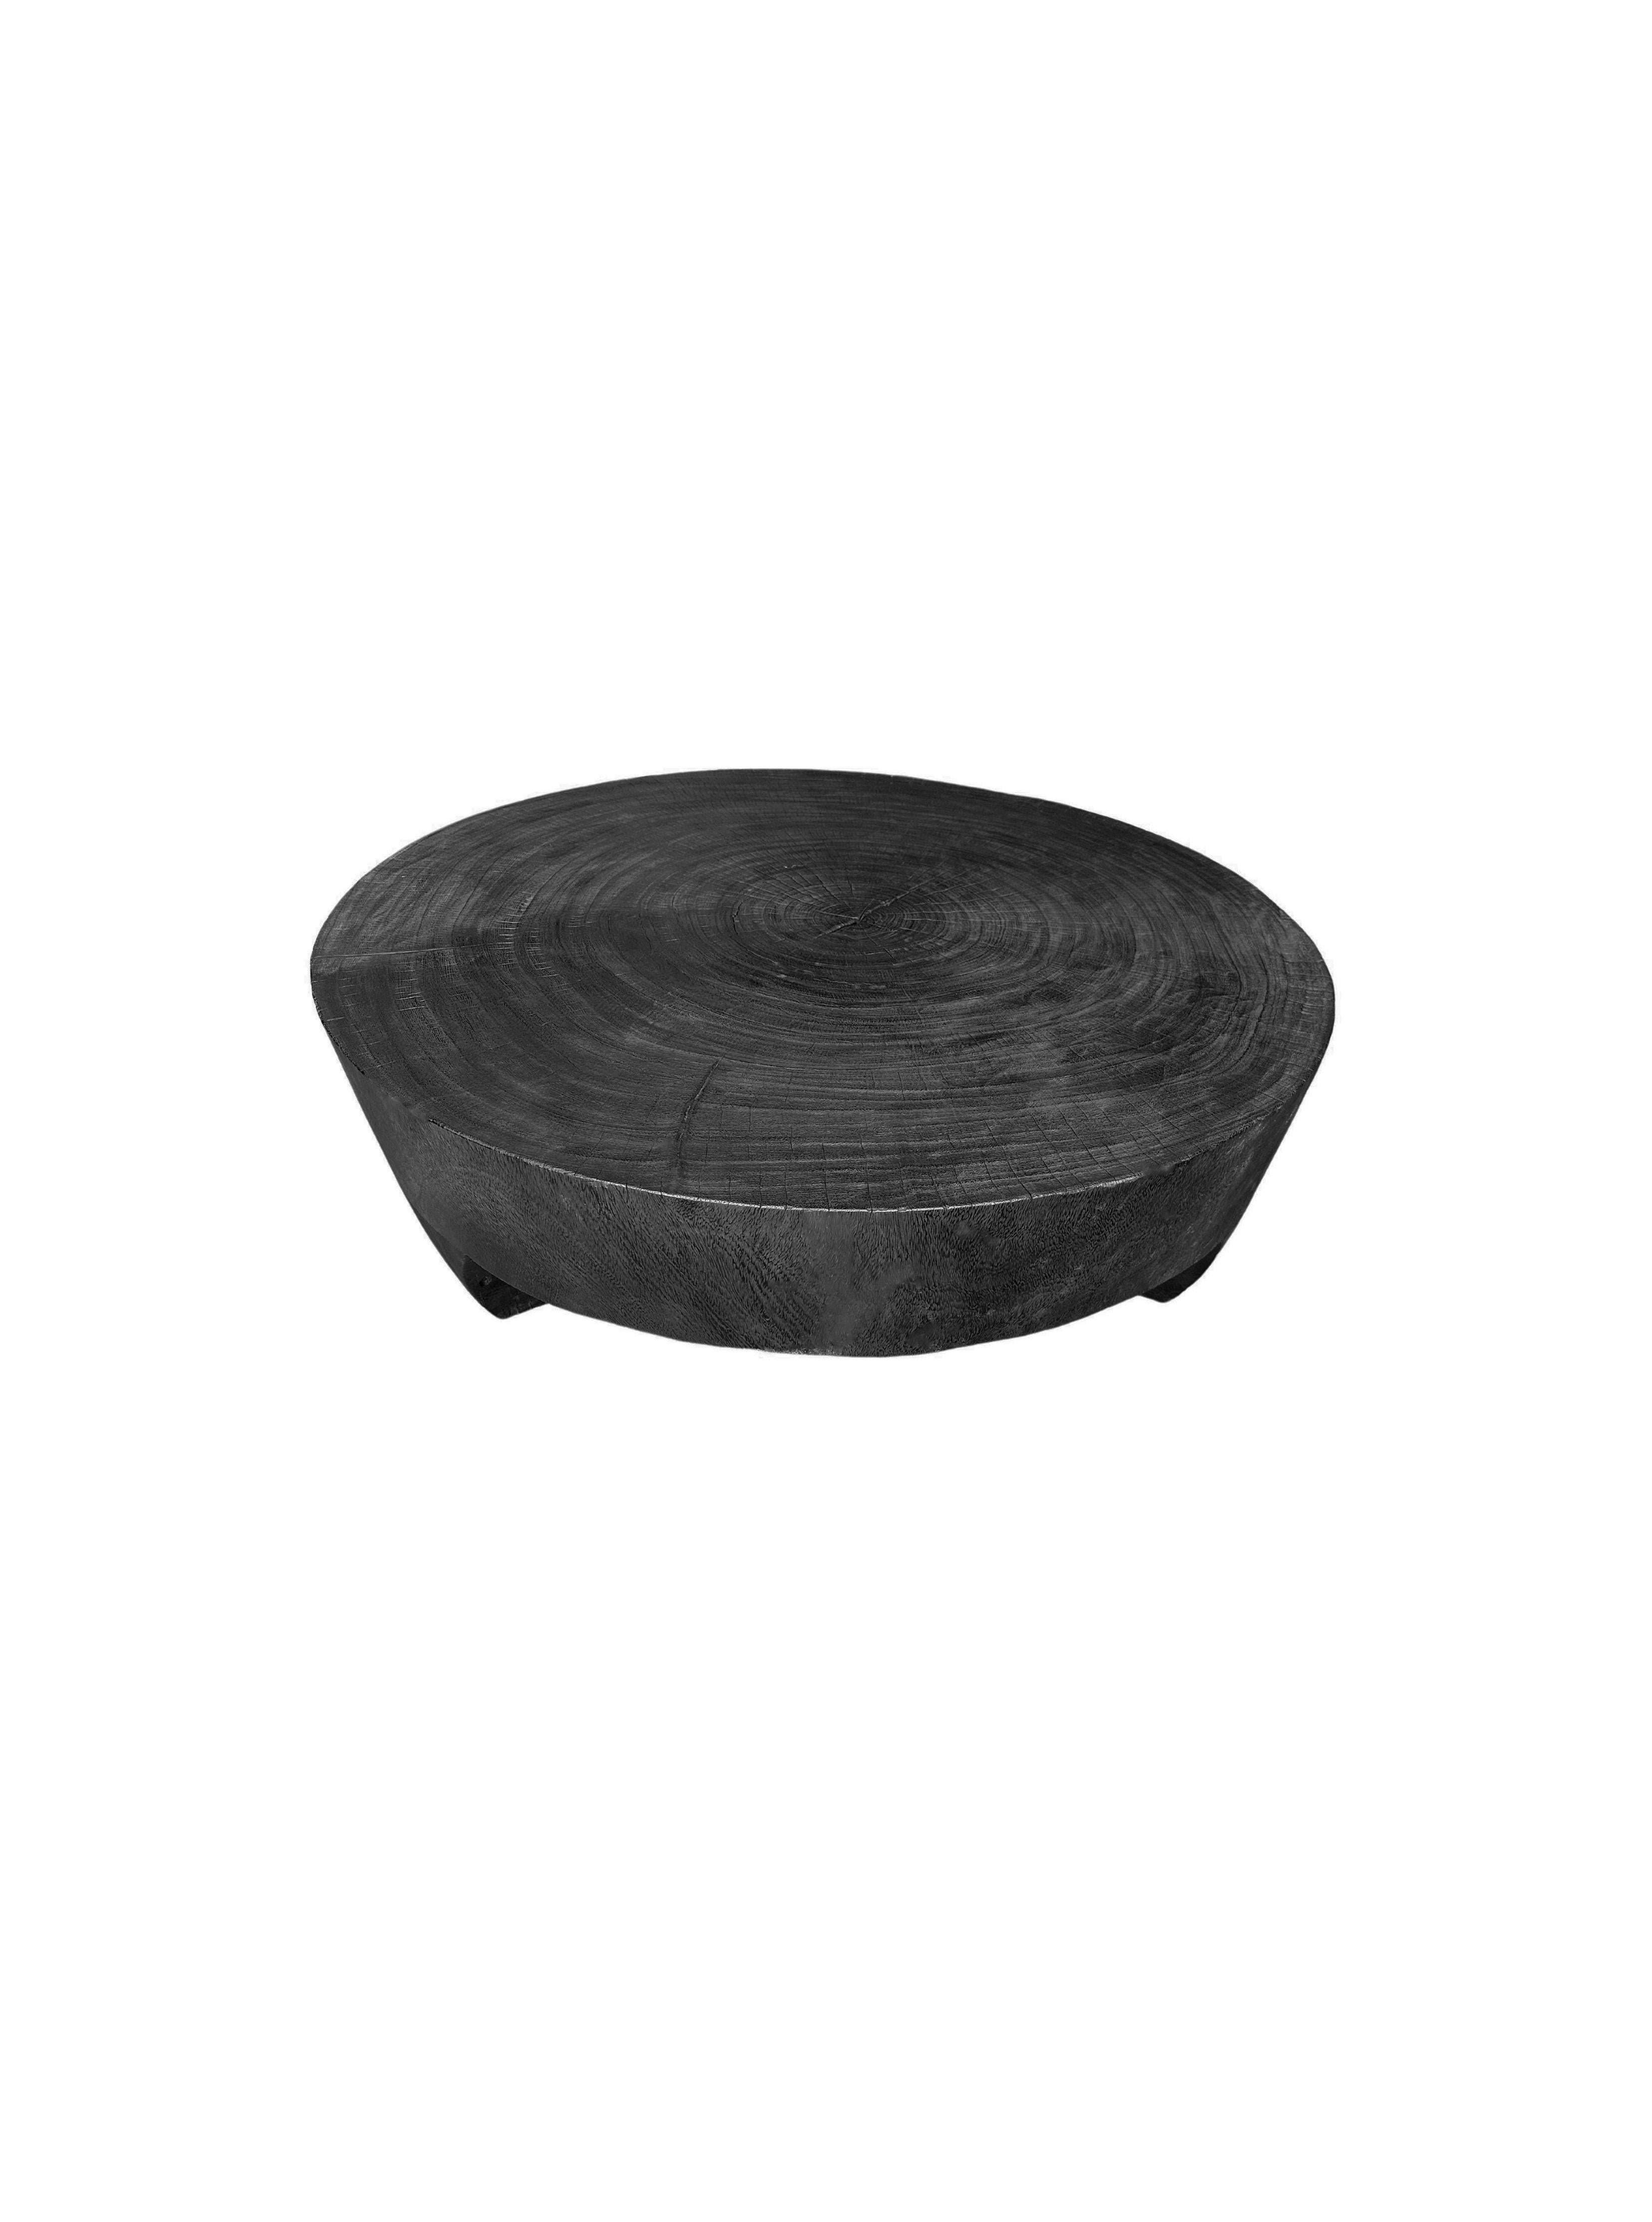 Hand-Crafted Solid Sculptural Suar Wood Round Table, Burnt Finish, Modern Organic For Sale